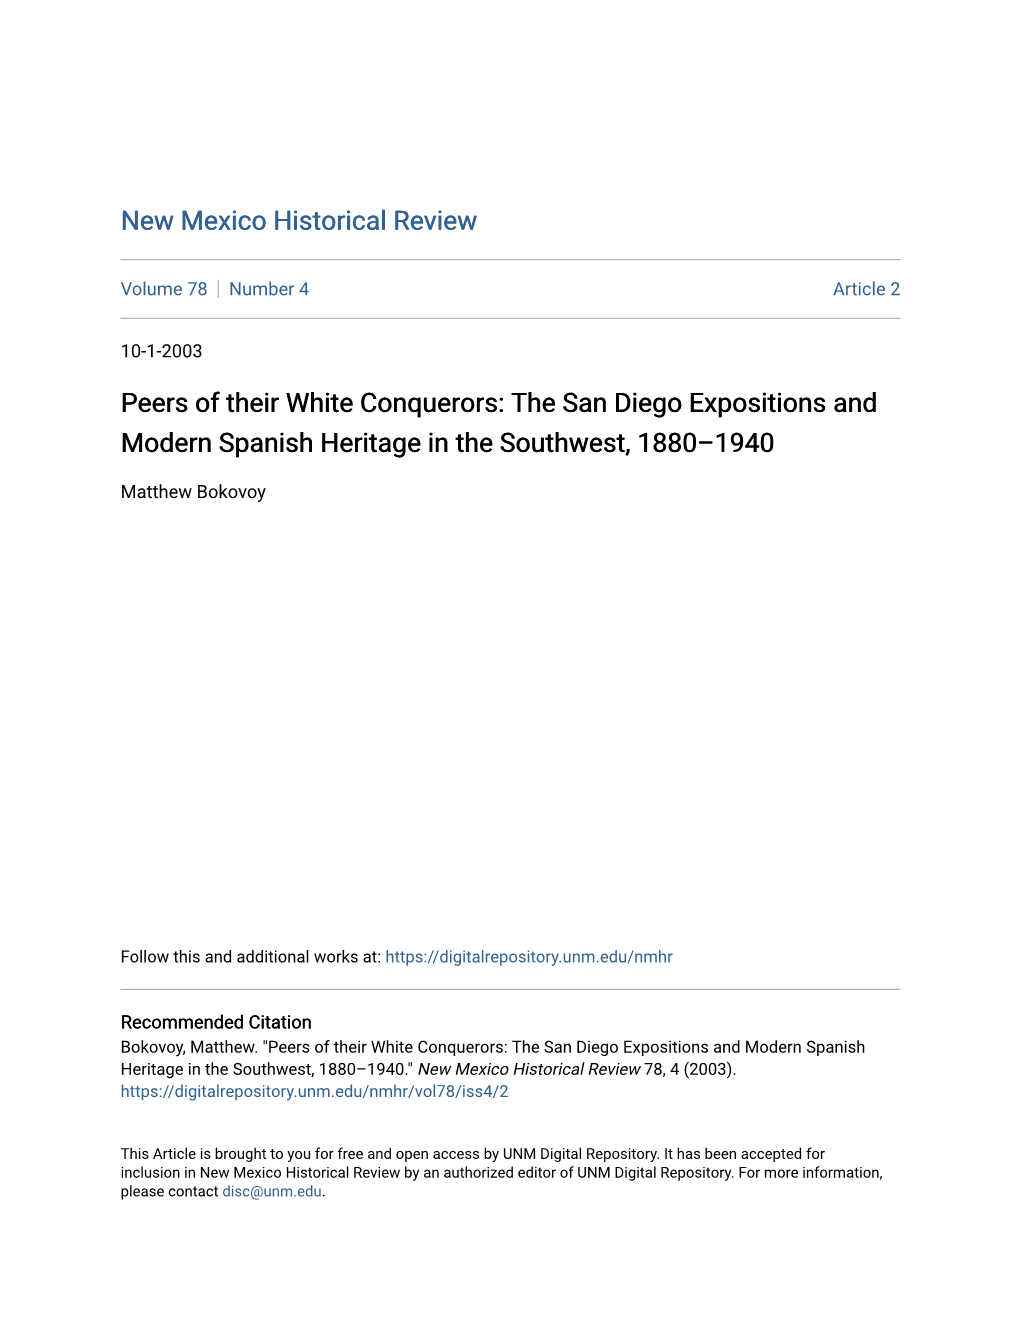 The San Diego Expositions and Modern Spanish Heritage in the Southwest, 1880–1940